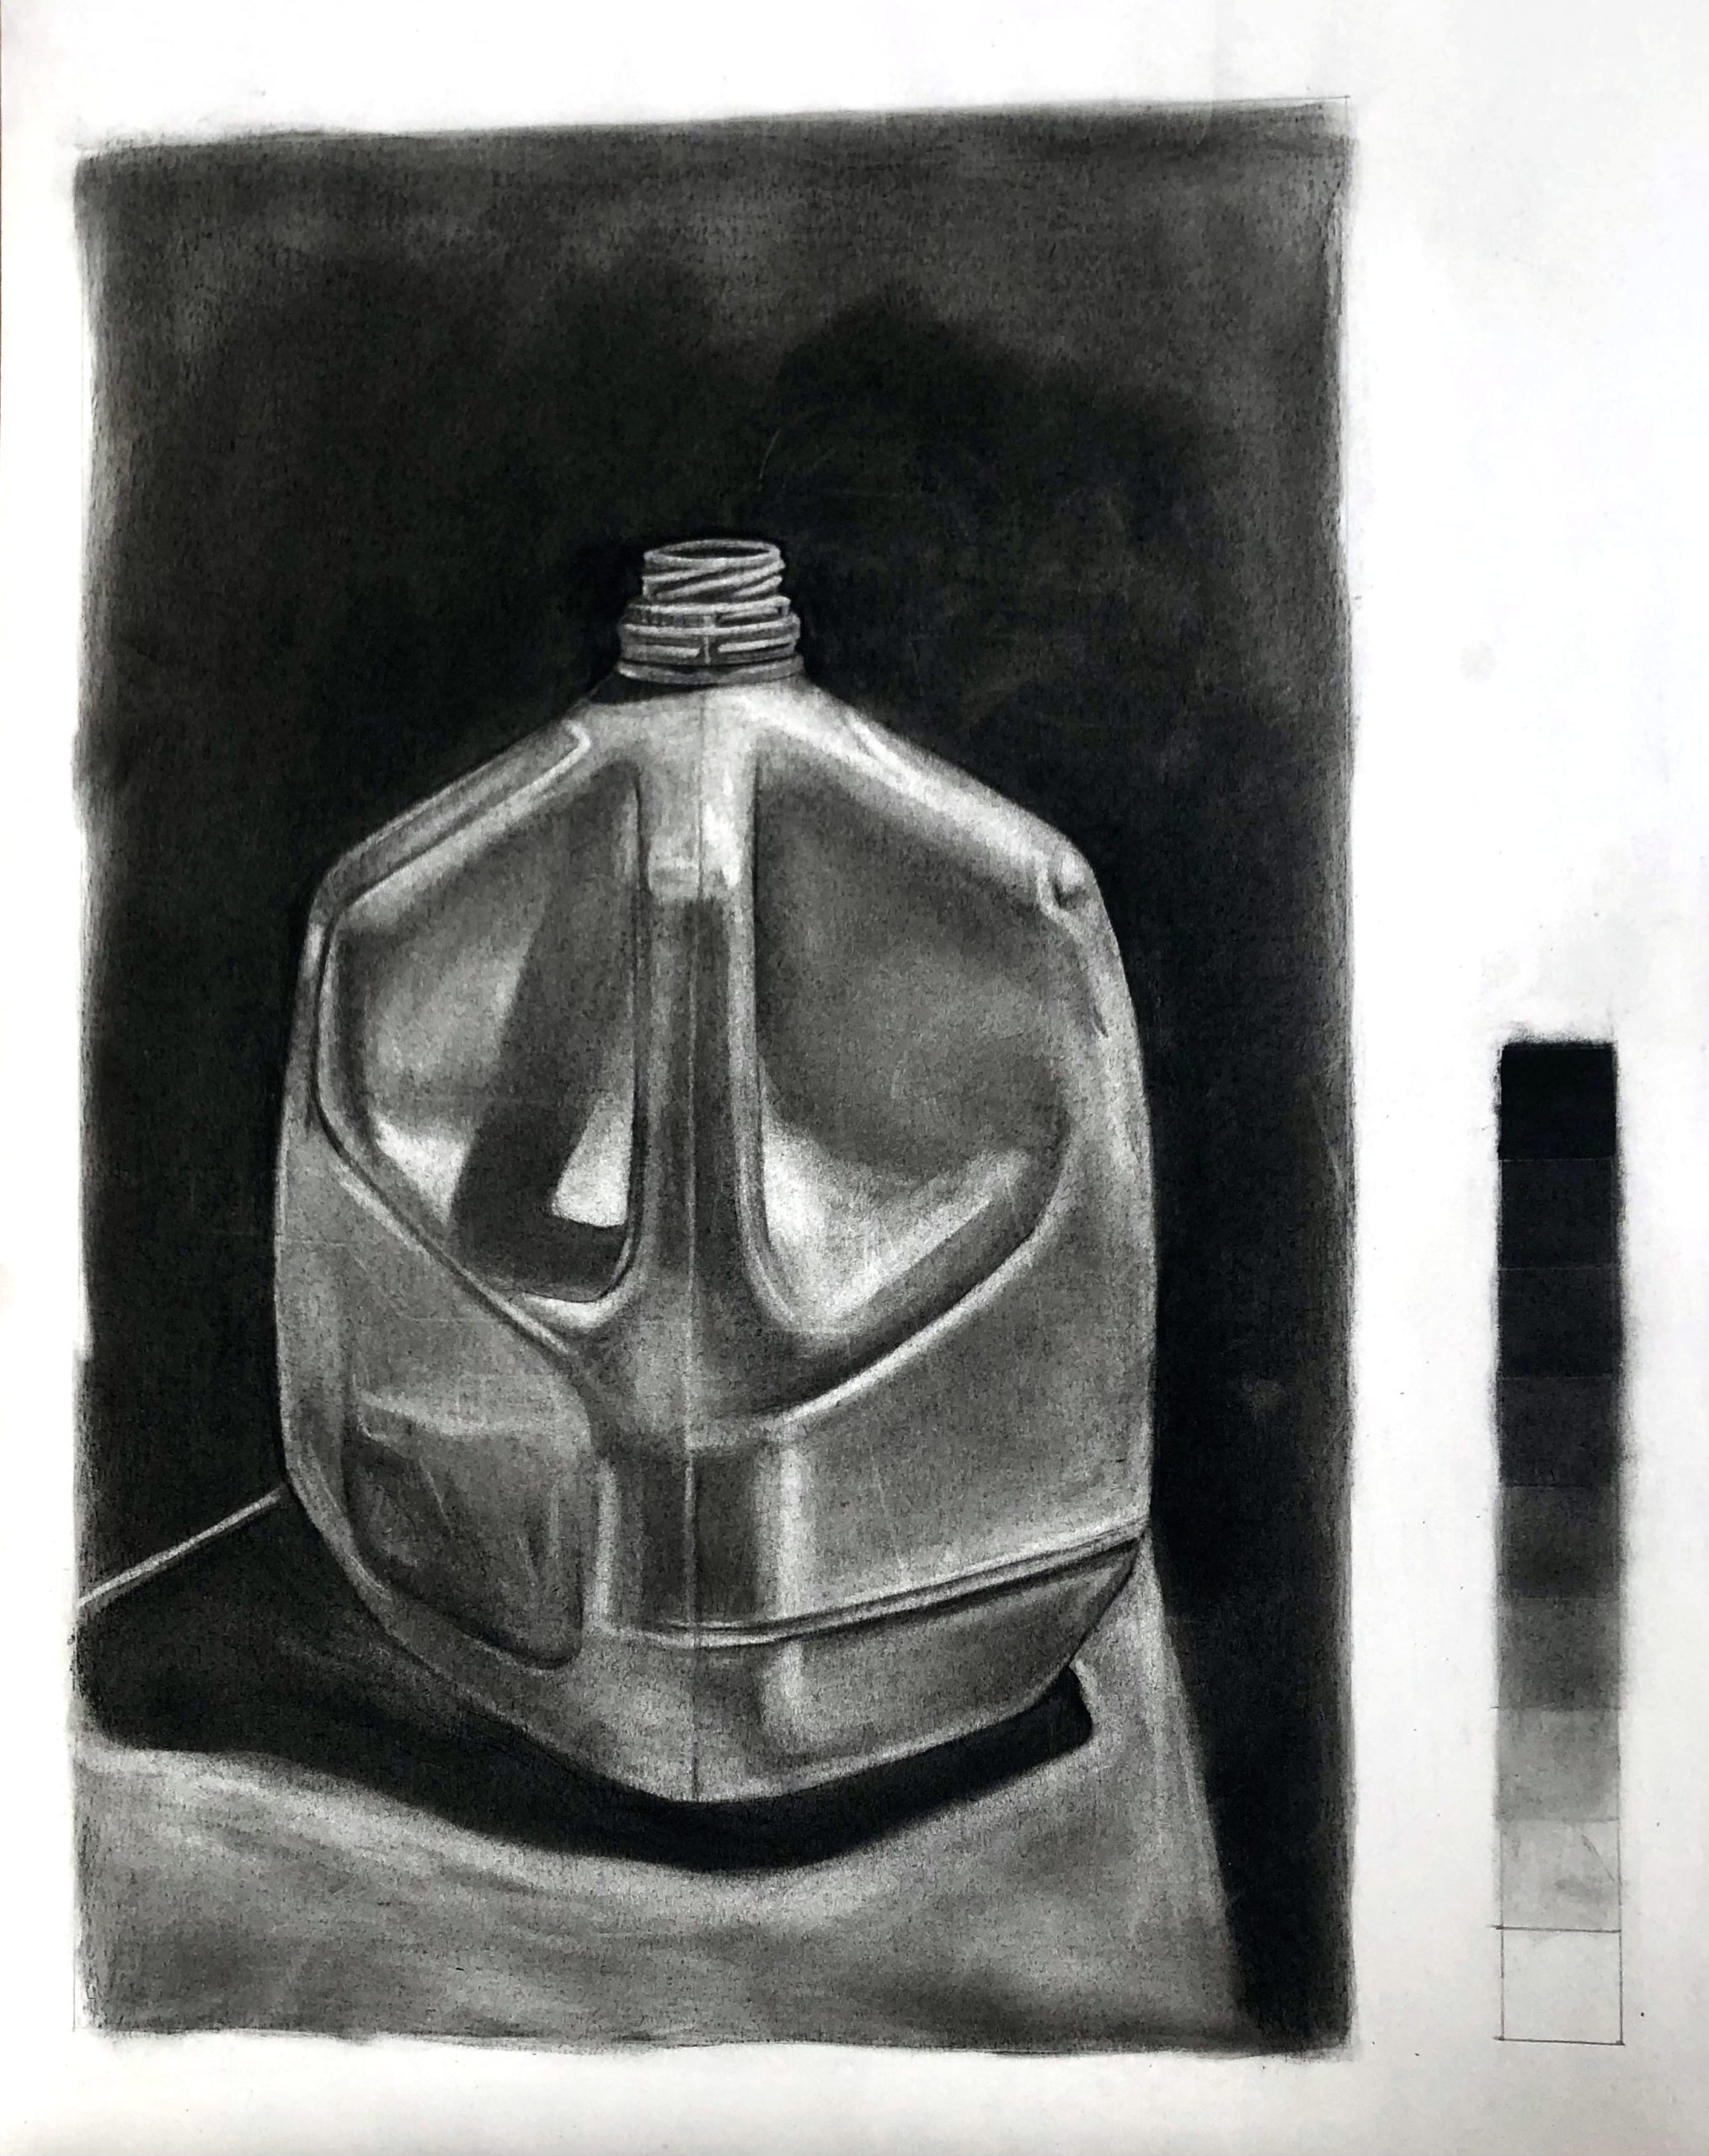 Savannah Gourley, Charcoal on Paper, 24″x18″, White Object Value Still Life with Value Scale, AR100 Drawing I, Spring 2020